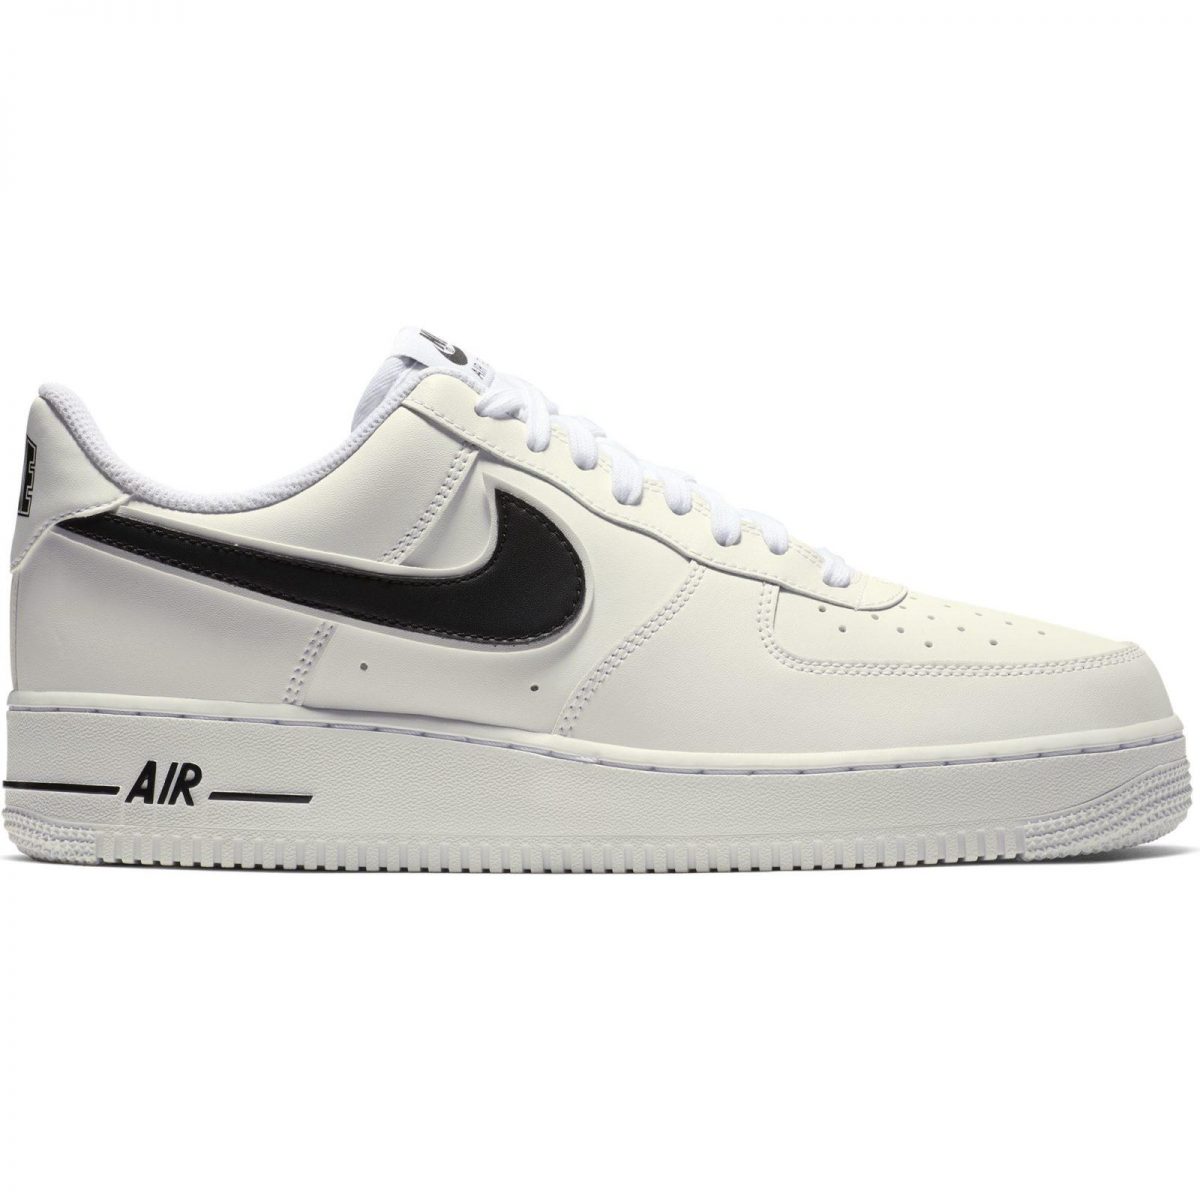 white on black air force 1